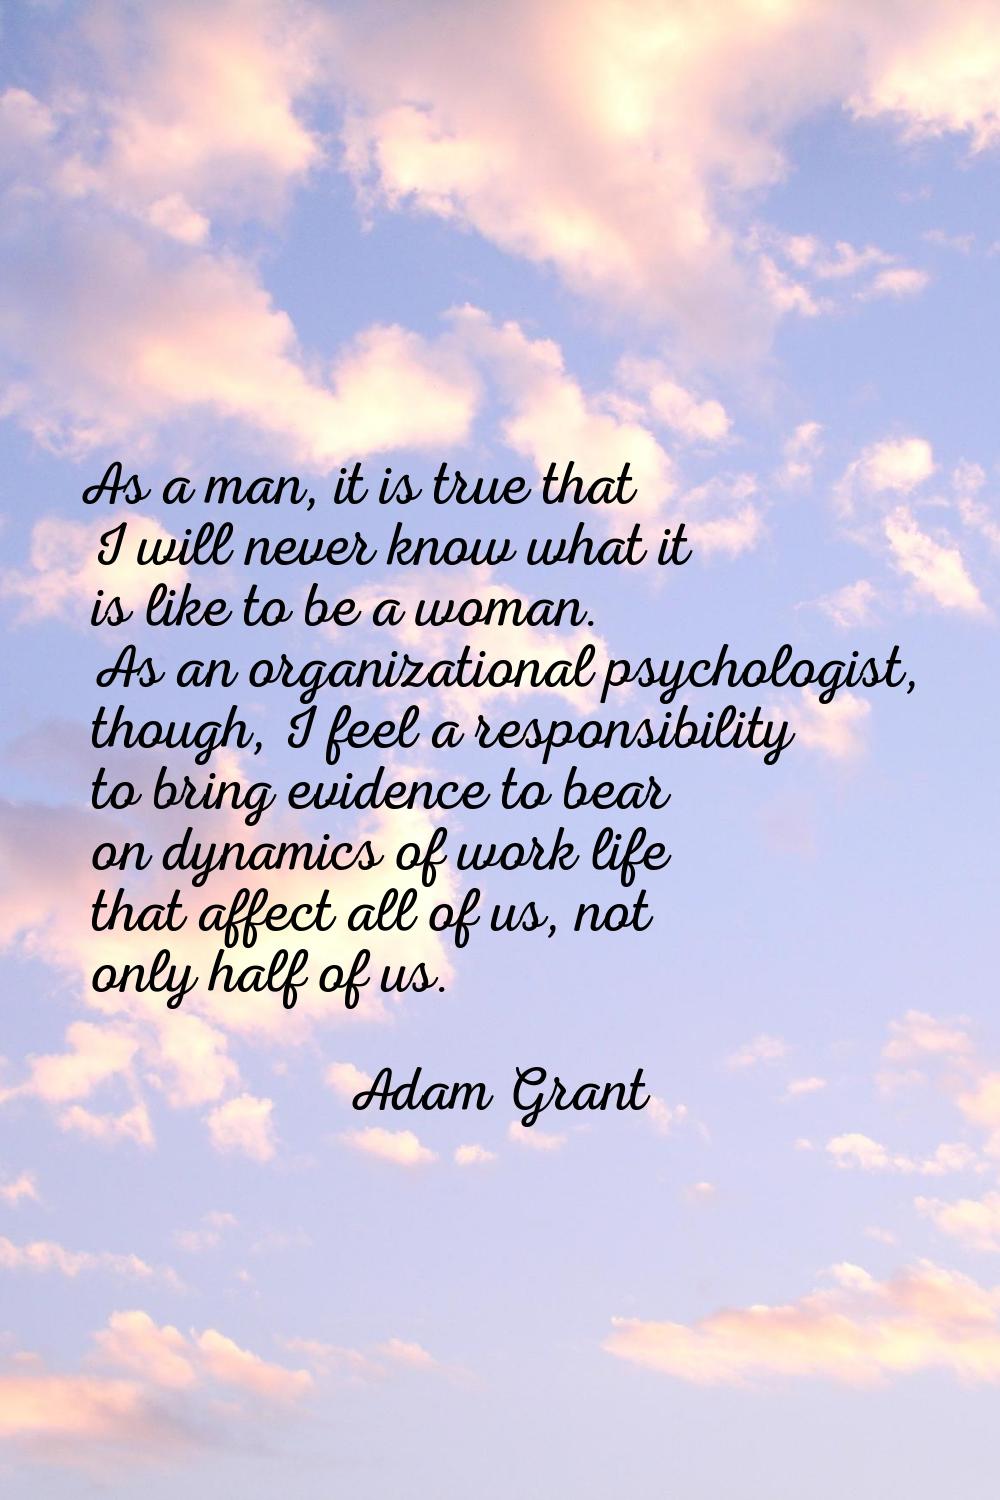 As a man, it is true that I will never know what it is like to be a woman. As an organizational psy